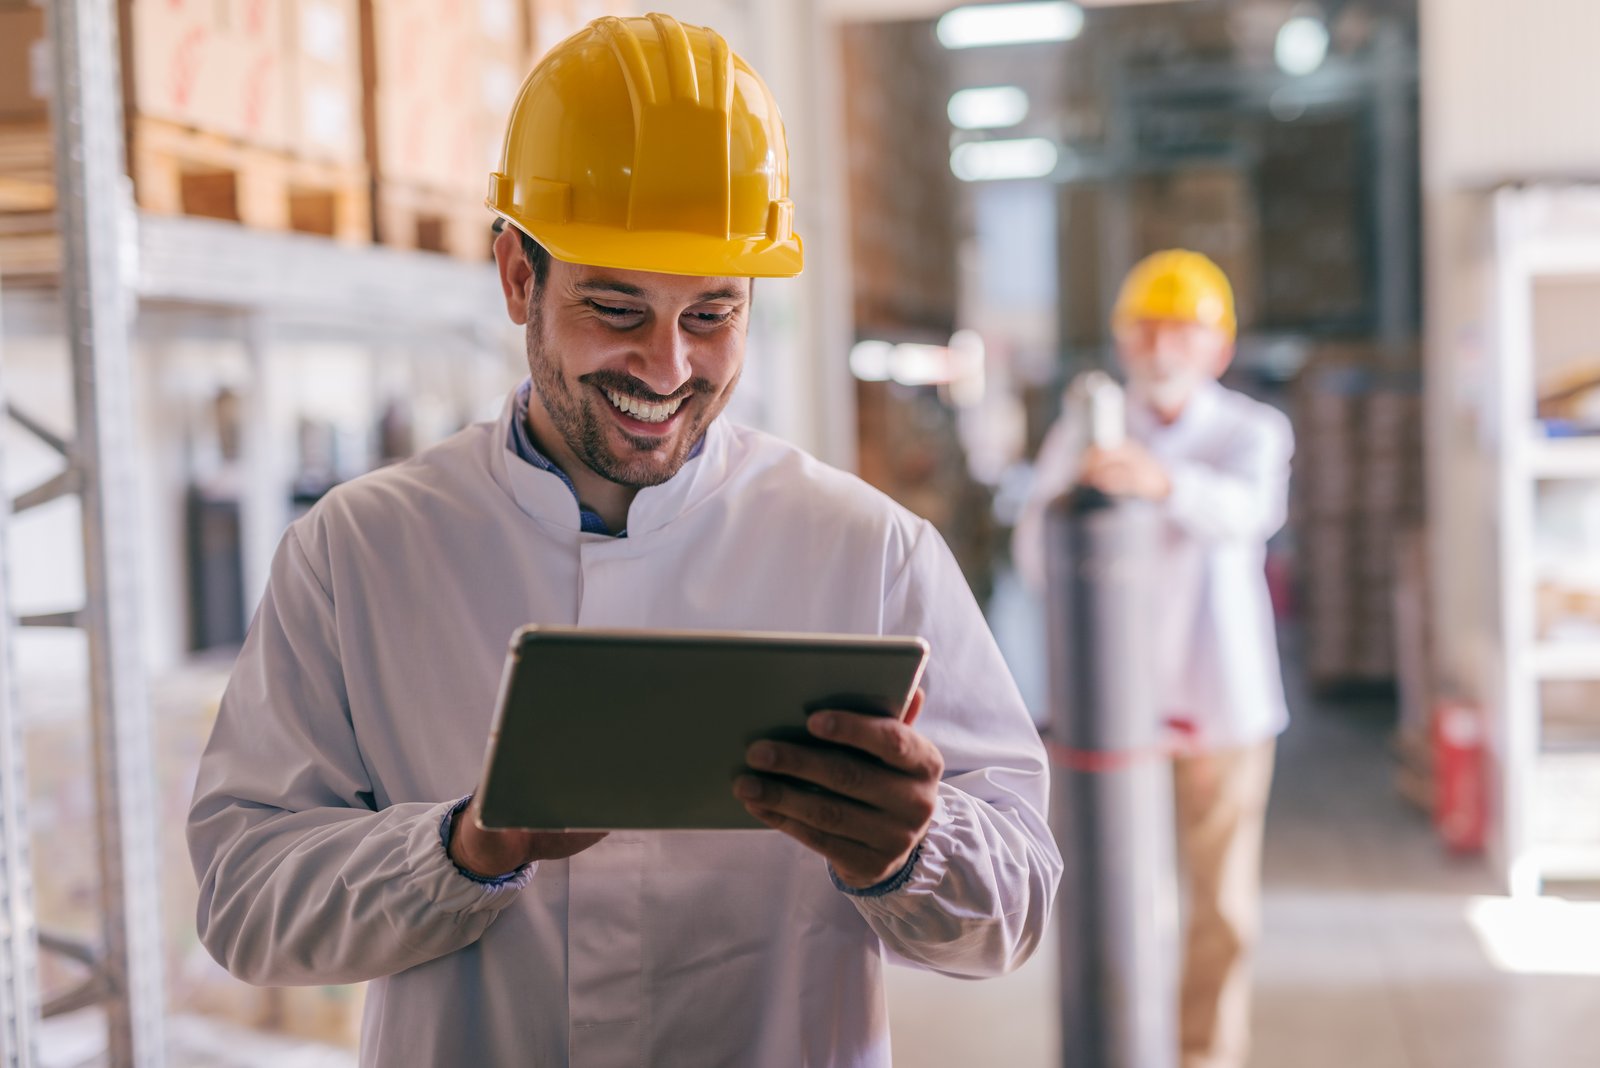 Man looking at a tablet laughing and wearing a construction site helmet in a warehouse. In the background another man